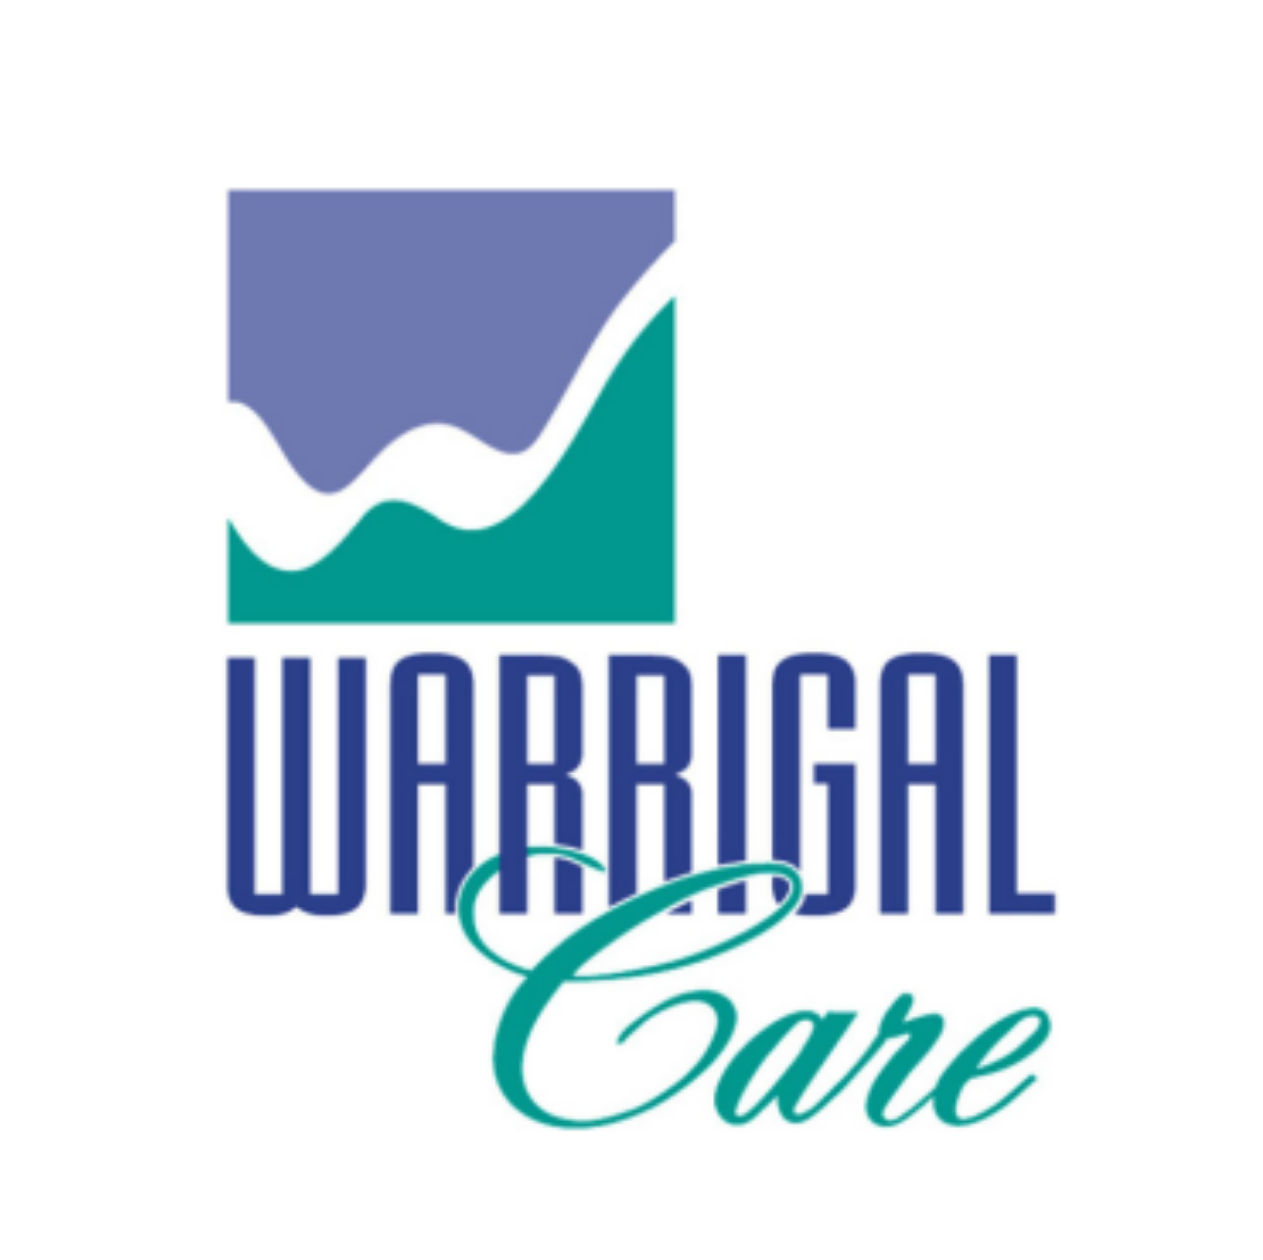 Warrigal Care Logo Circle on a Transparent Background